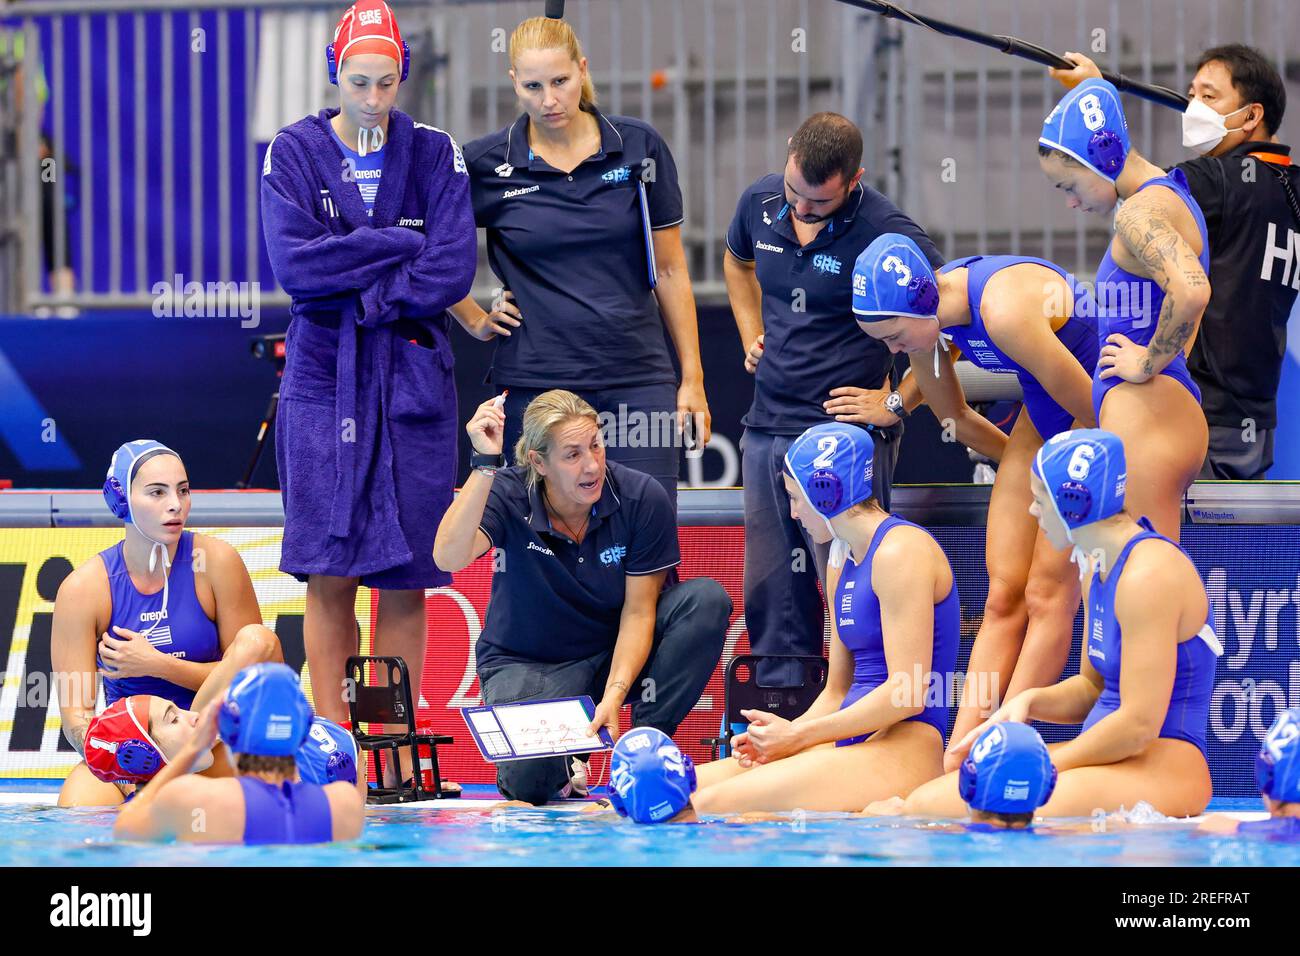 FUKUOKA, JAPAN - JULY 28: time out greece with headcoach Alexia Anna Kammenou of Greece, Chrysoula Diamantopoulou of Greece, Eleftheria Plevritou of Greece, Ioanna Chydirioti of Greece, Nikoleta Eleftheriadou of Greece, Eleni Xenaki of Greece, Eirini Ninou of Greece, Eleni Elliniadi of Greece, Christina Siouti of Greece, Athina Dimitra Giannopoulou of Greece, Maria Myriokefalitaki of Greece, Ioanna Stamatopoulou of Greece, Foteini Tricha of Greece, Eleftheria Fountotou of Greece during the World Aquatics Championships 2023 Women's Waterpolo Classification 7th-8th place match between Canada and Stock Photo